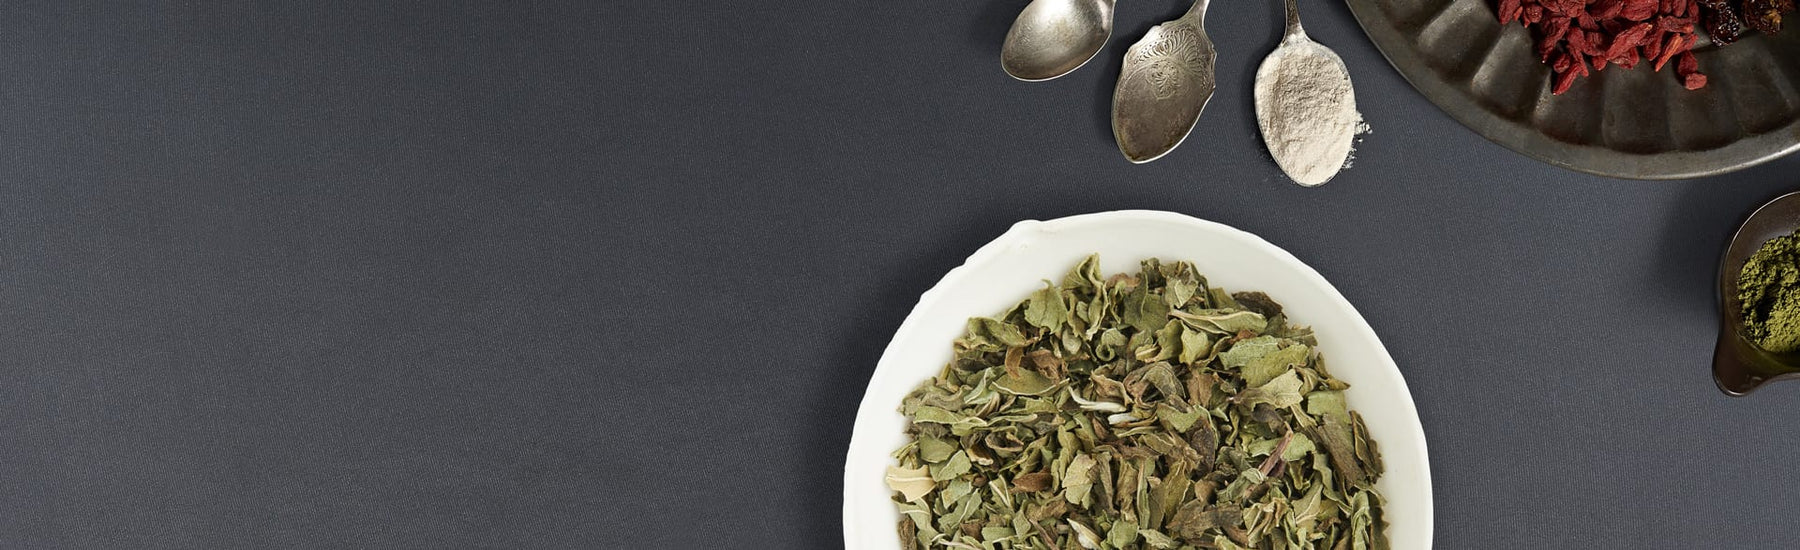 Picture of dried herb in white bowl dark background by Neal's Yard Remedies